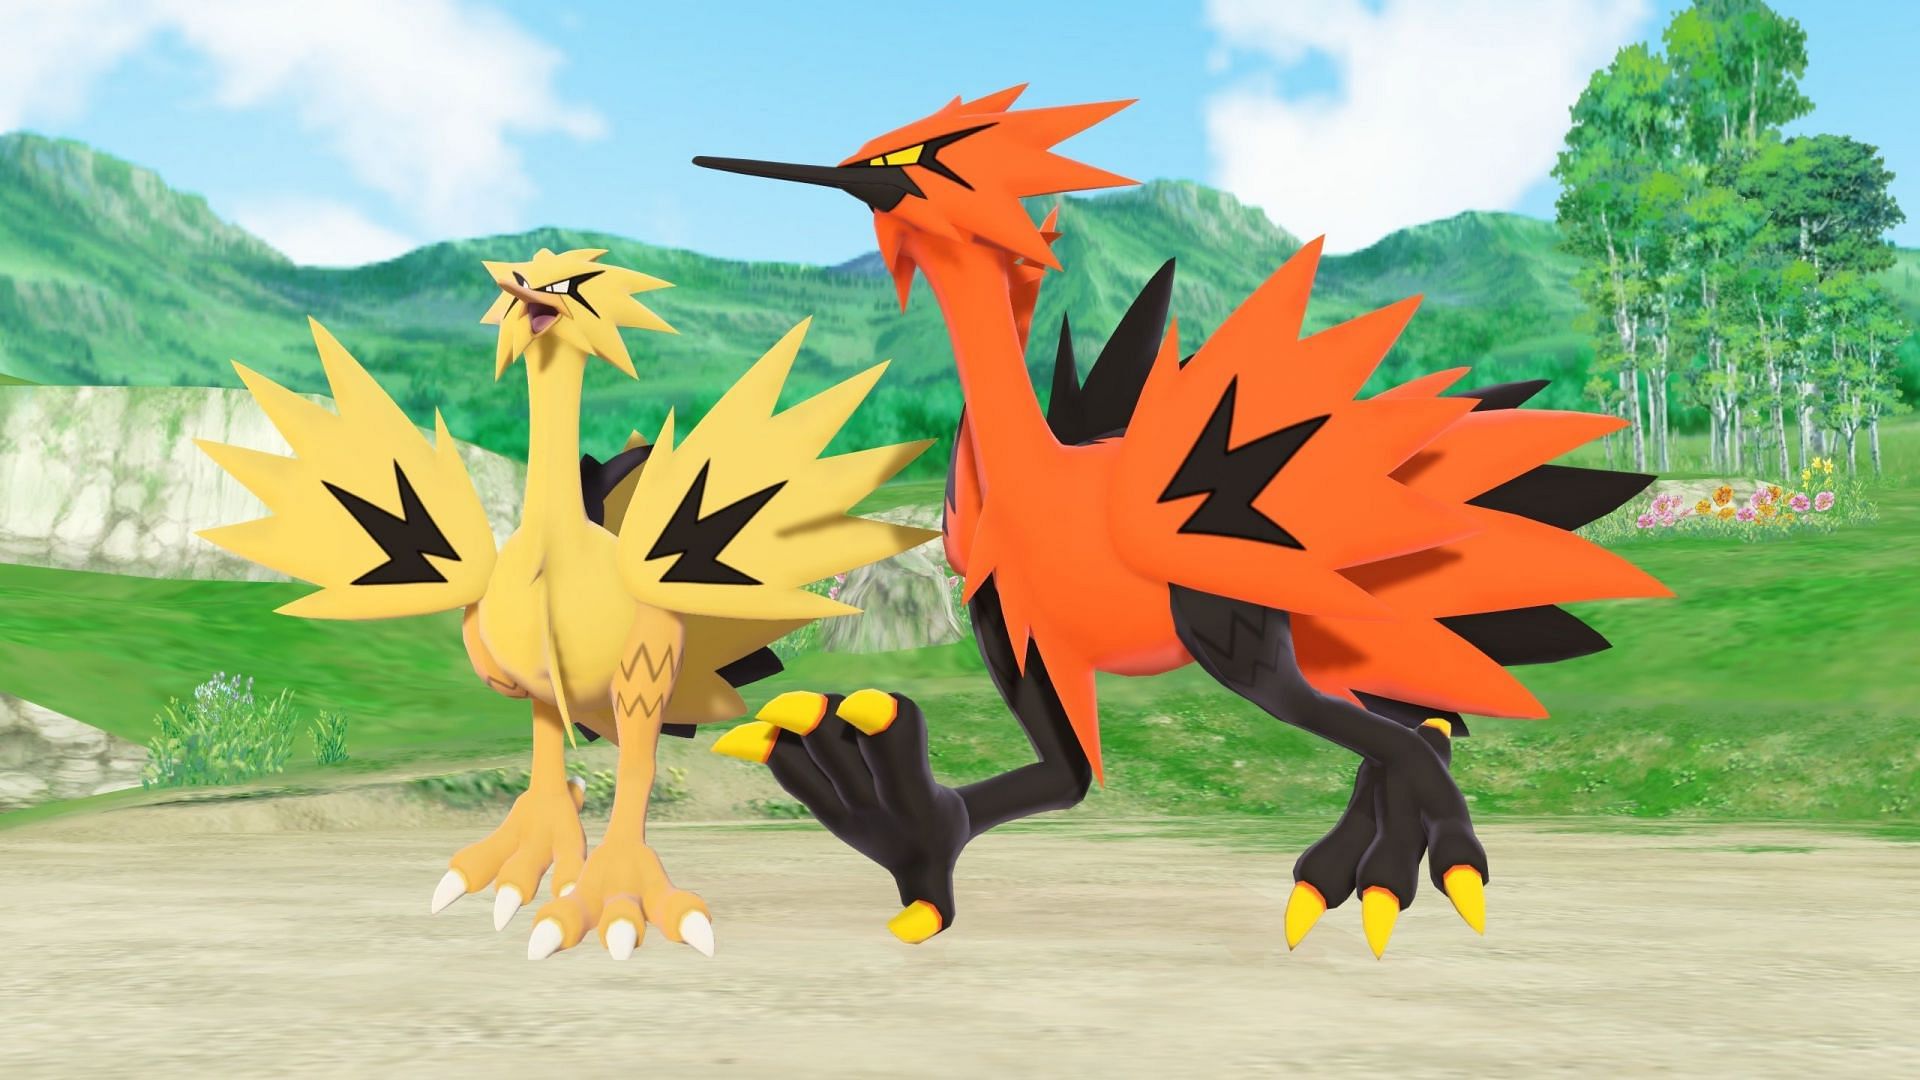 Another Galarian Zapdos! Another excellent throw! #Pokemon